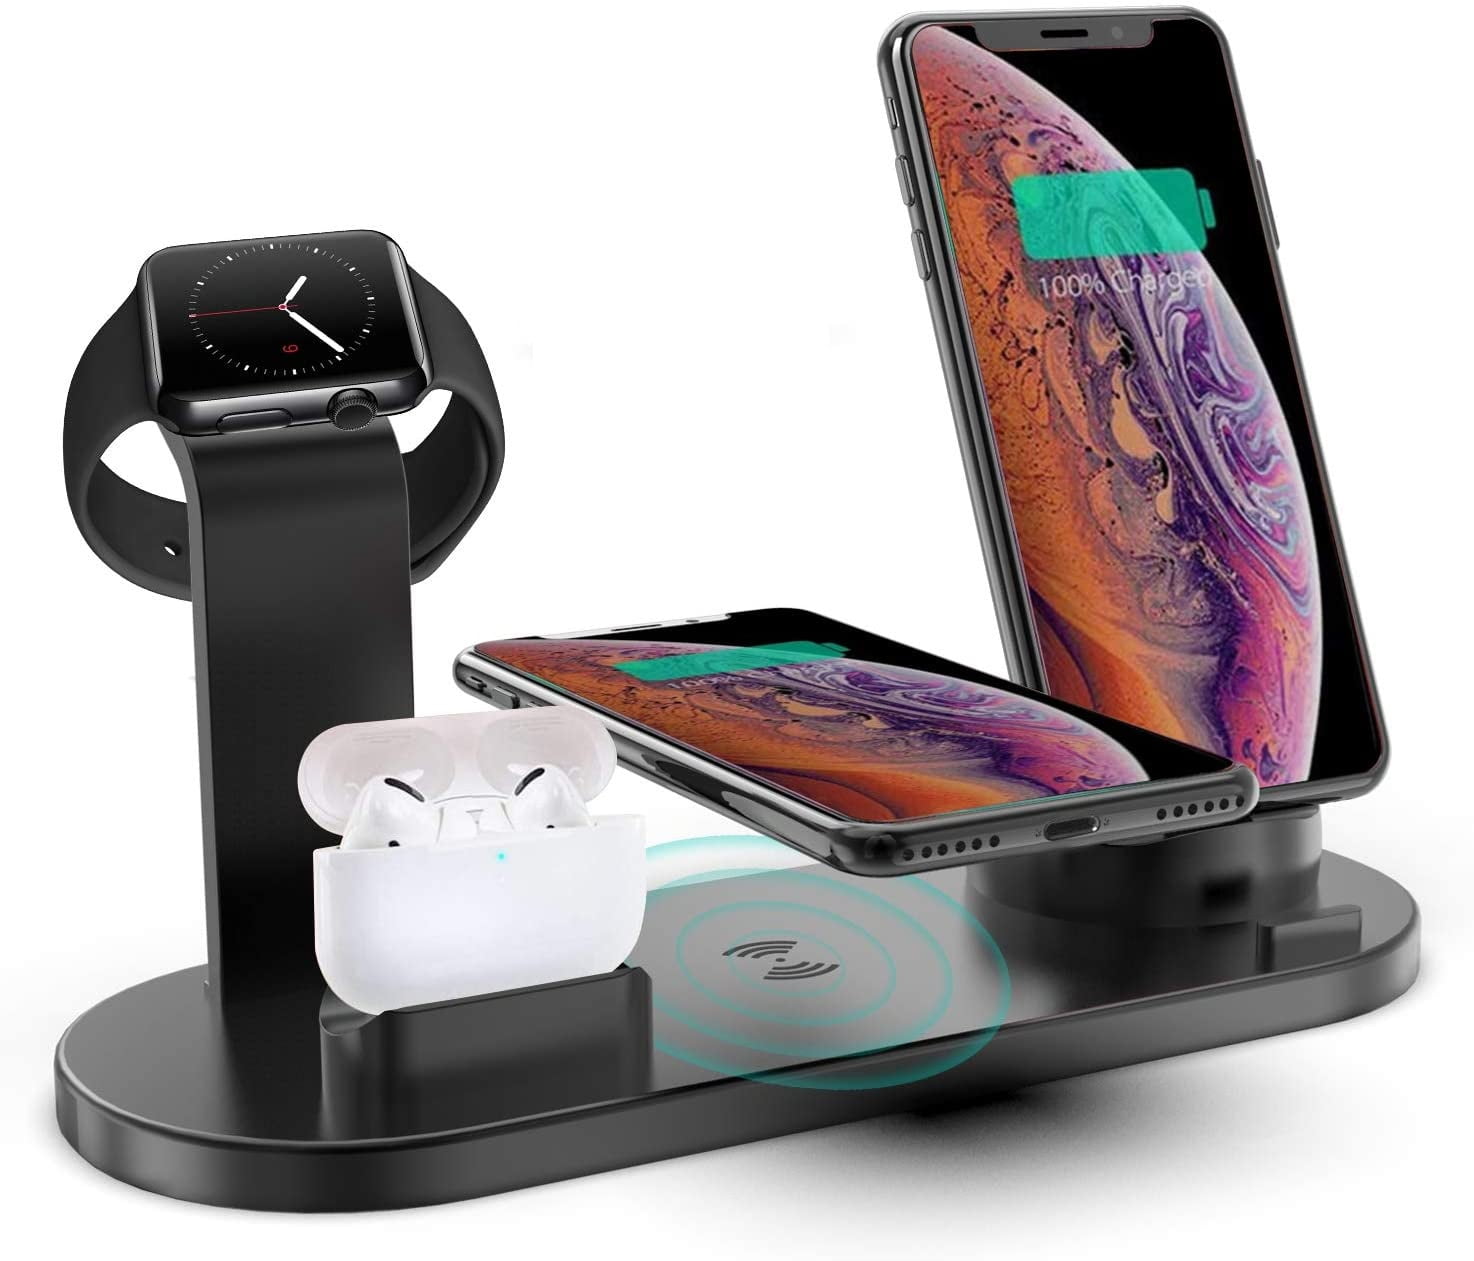 iPhone iWatch AirPods charger dock,4 in1 stand,Sliver/RossGold/Black,freeship 